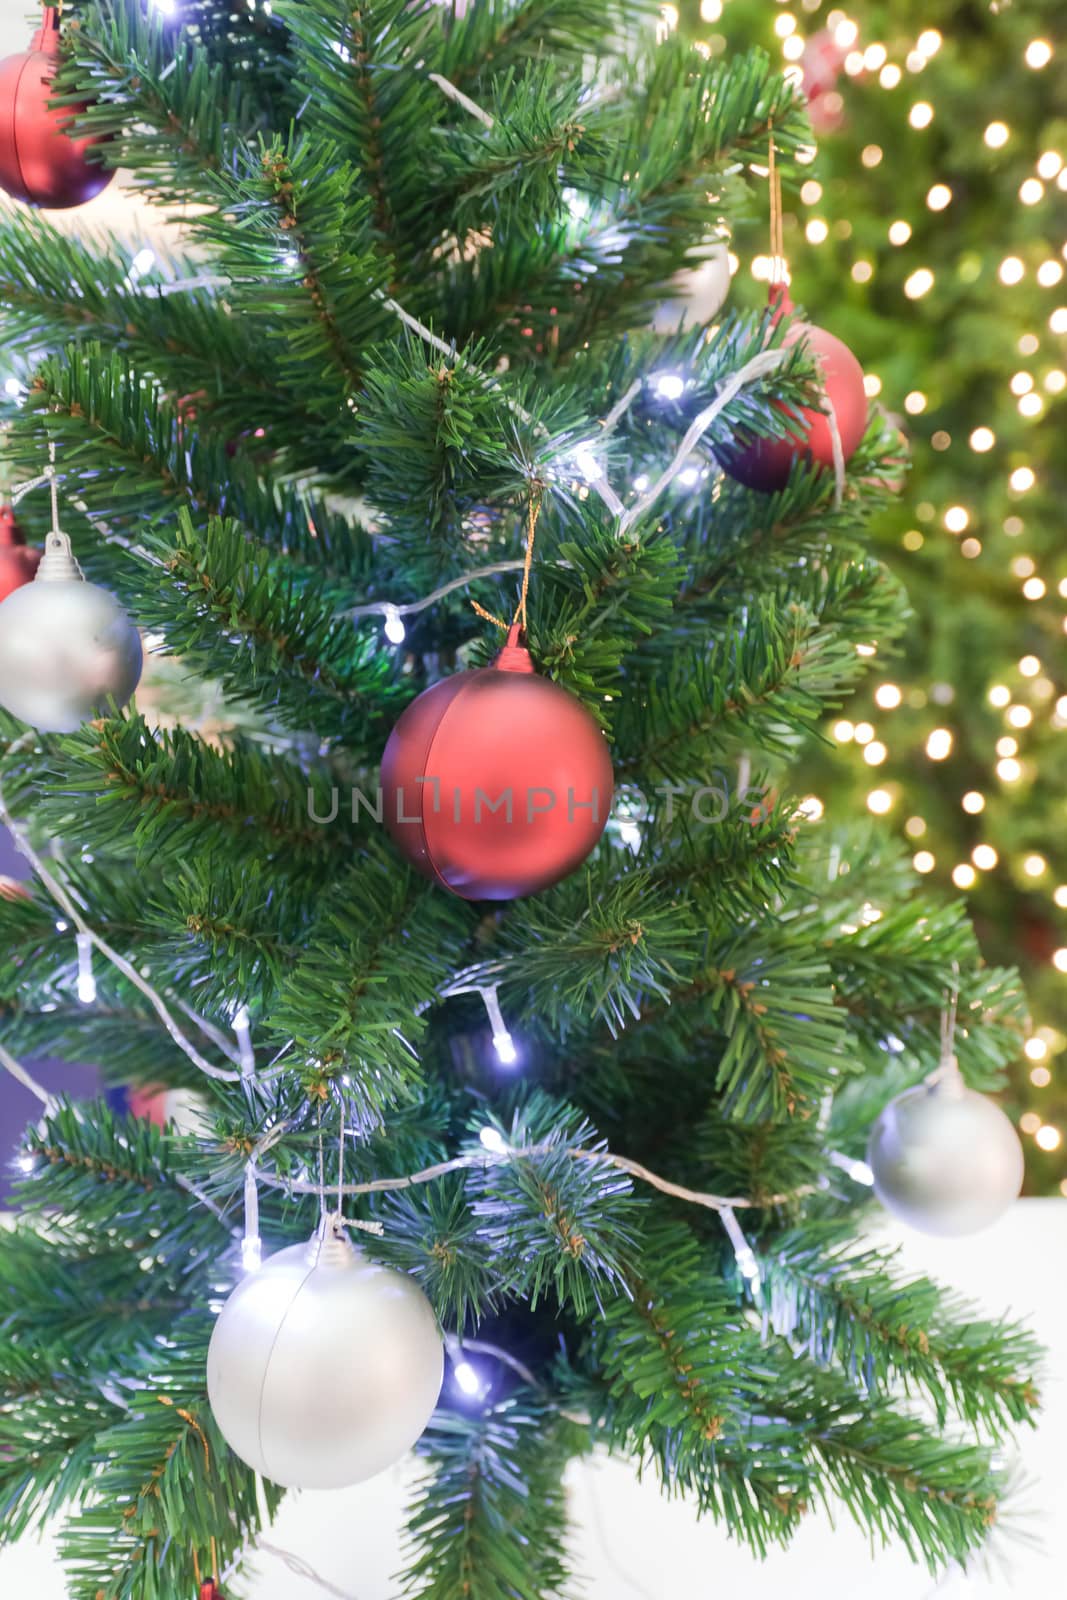 Background image of a Christmas tree decorated with lights by nikky1972